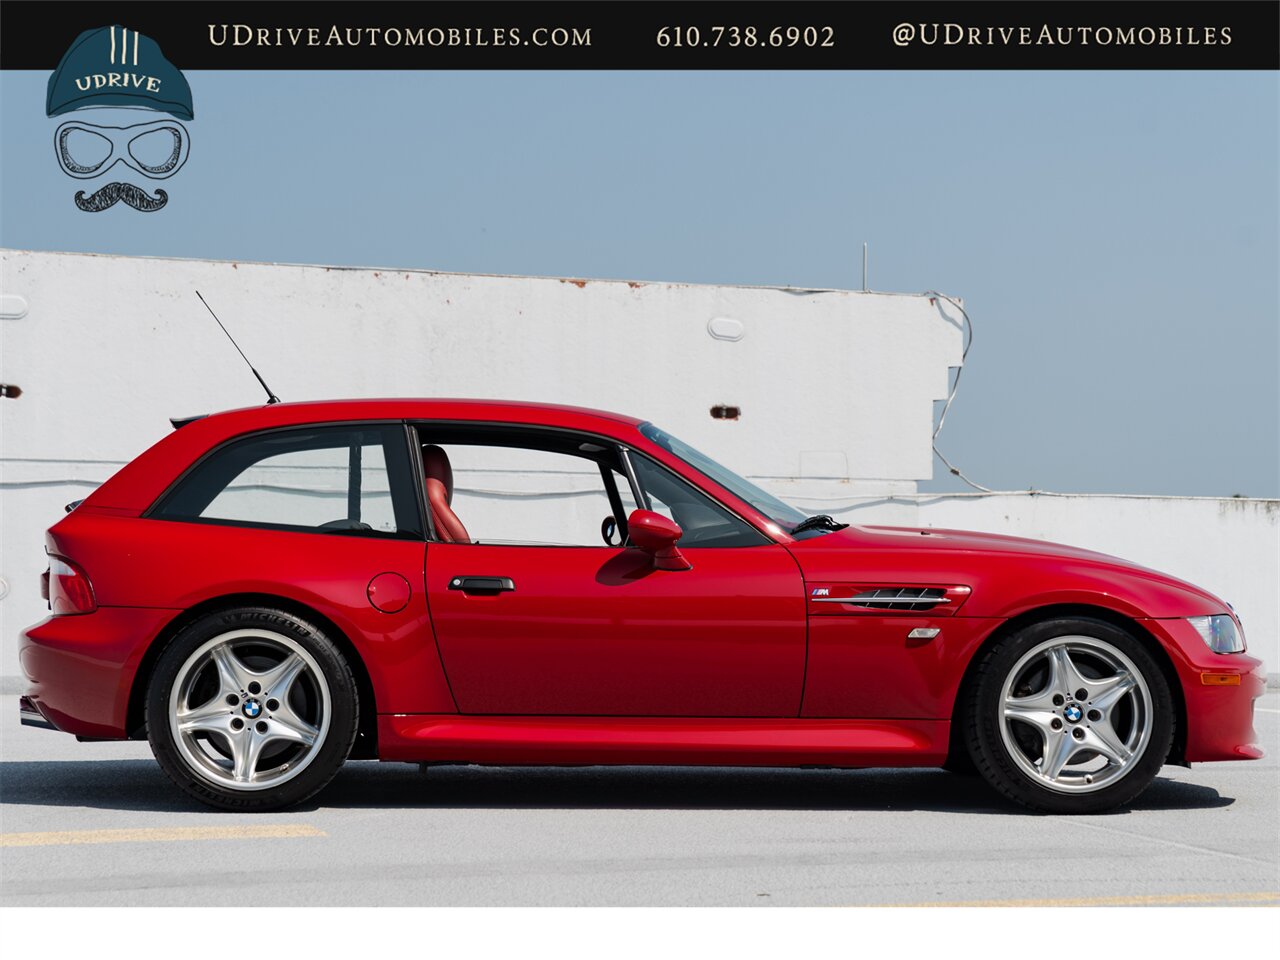 2000 BMW Z3 M  Coupe 25k Miles  Sunroof Delete $4k Recent Service - Photo 17 - West Chester, PA 19382